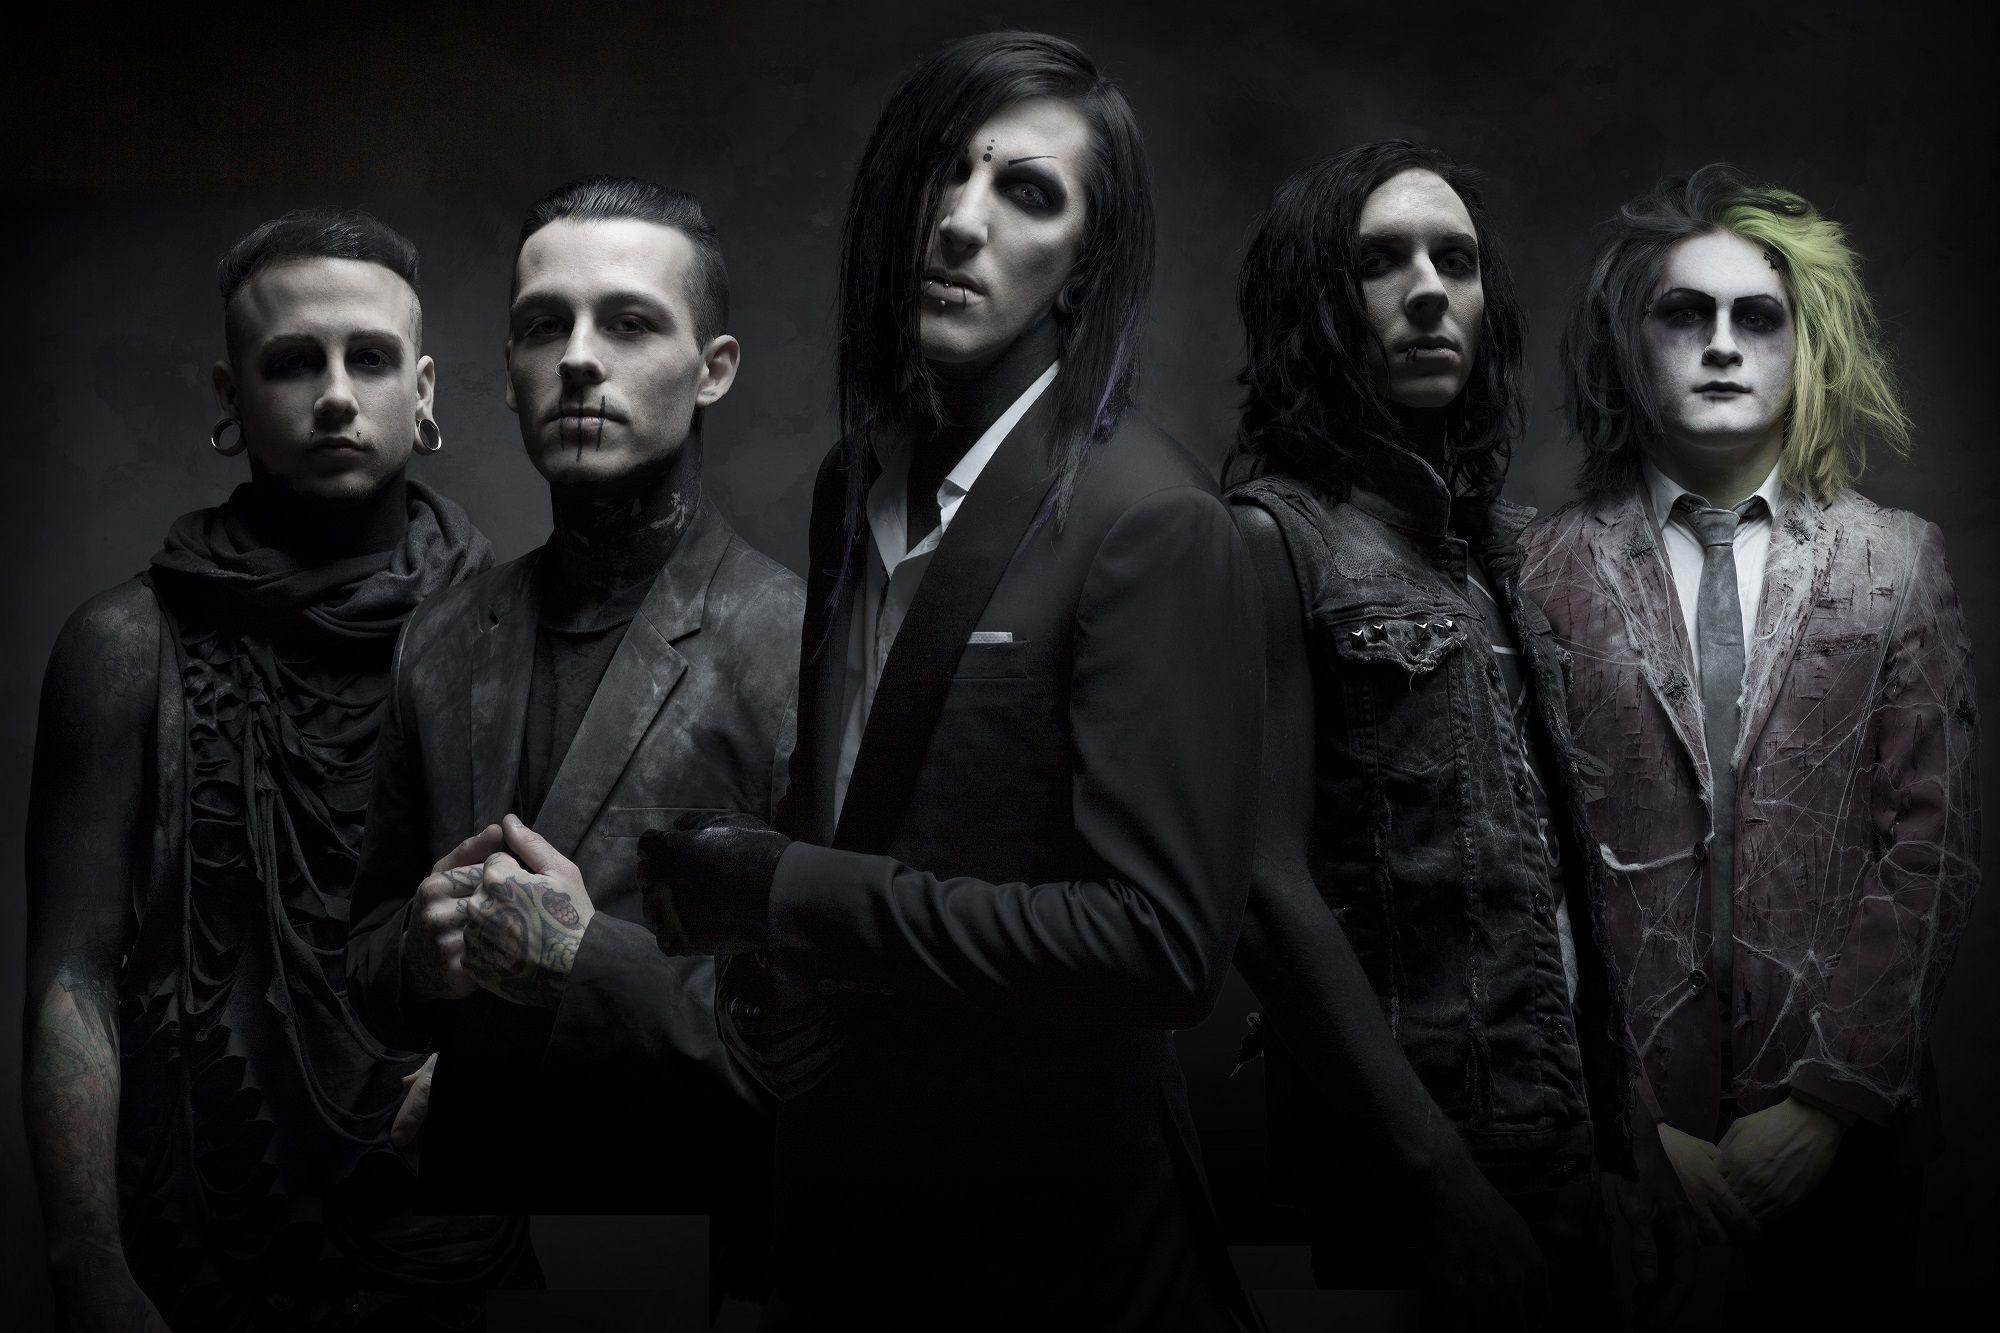 VIDEO: Motionless In White introduce The Misfits at AP Music Awards